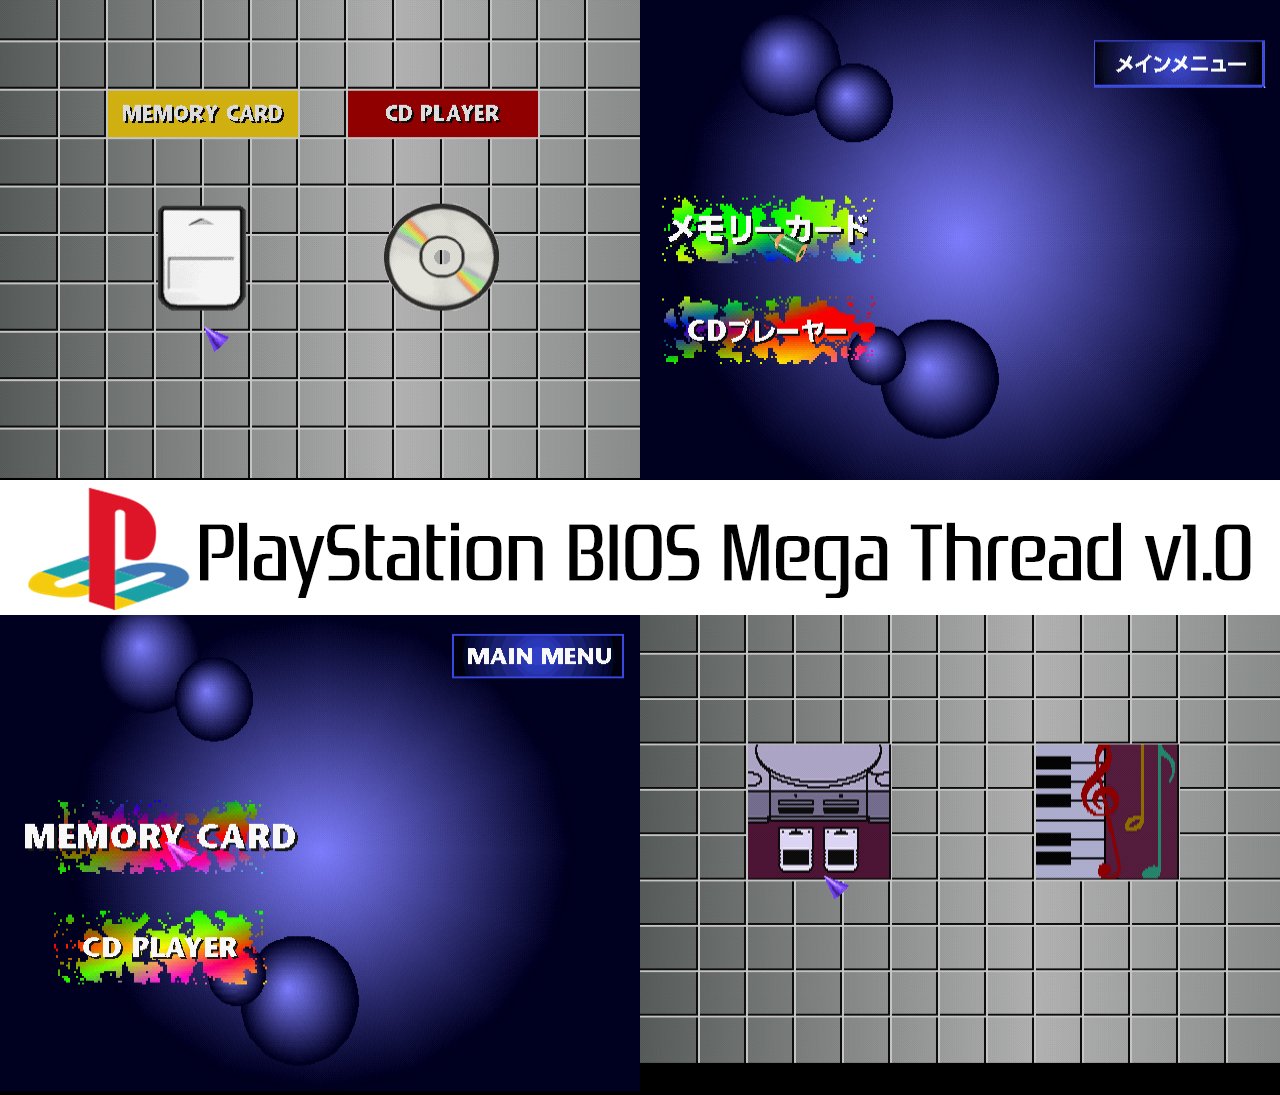 where to get bios in support of psx emulator